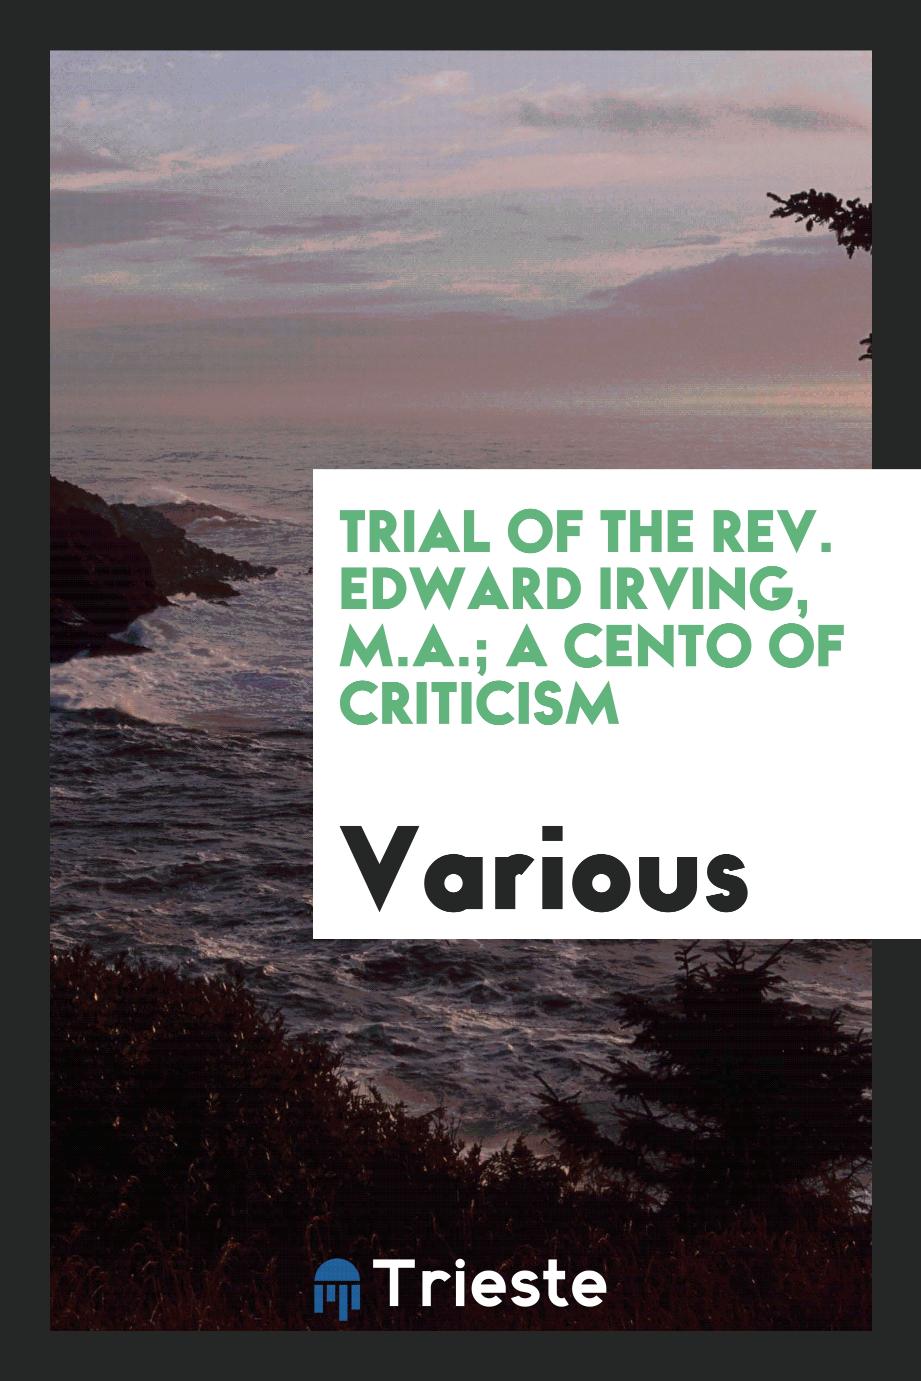 Trial of the Rev. Edward Irving, M.A.; A Cento of Criticism